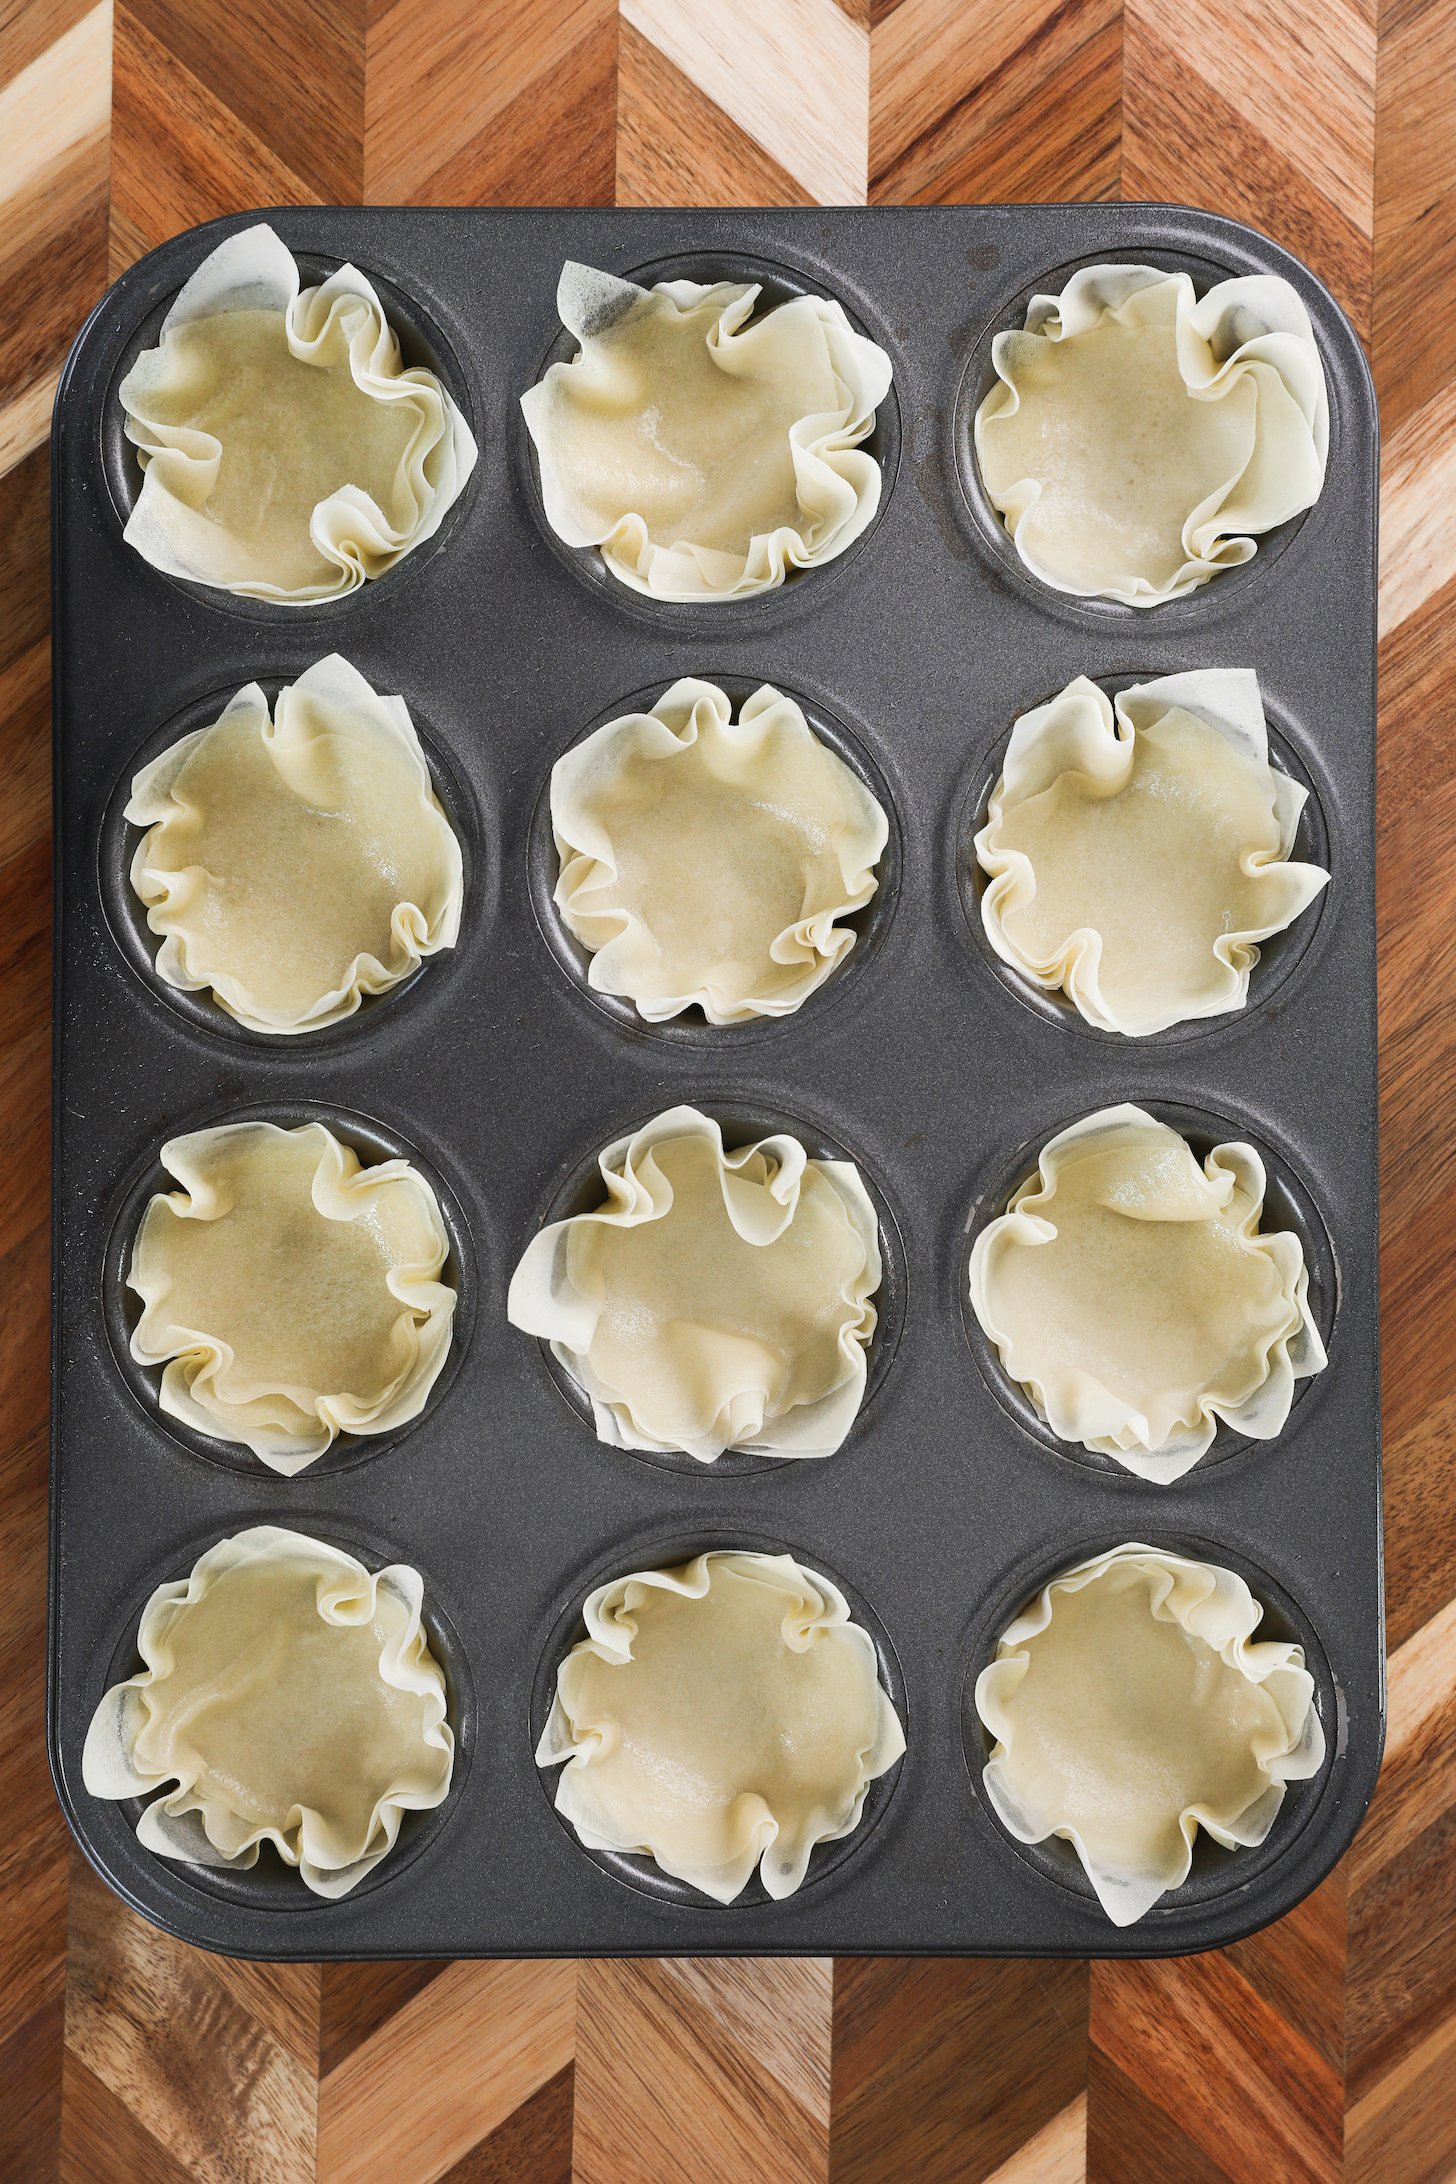 A cup cake tray holding 12 uncooked pastry shells shaped like a flower.